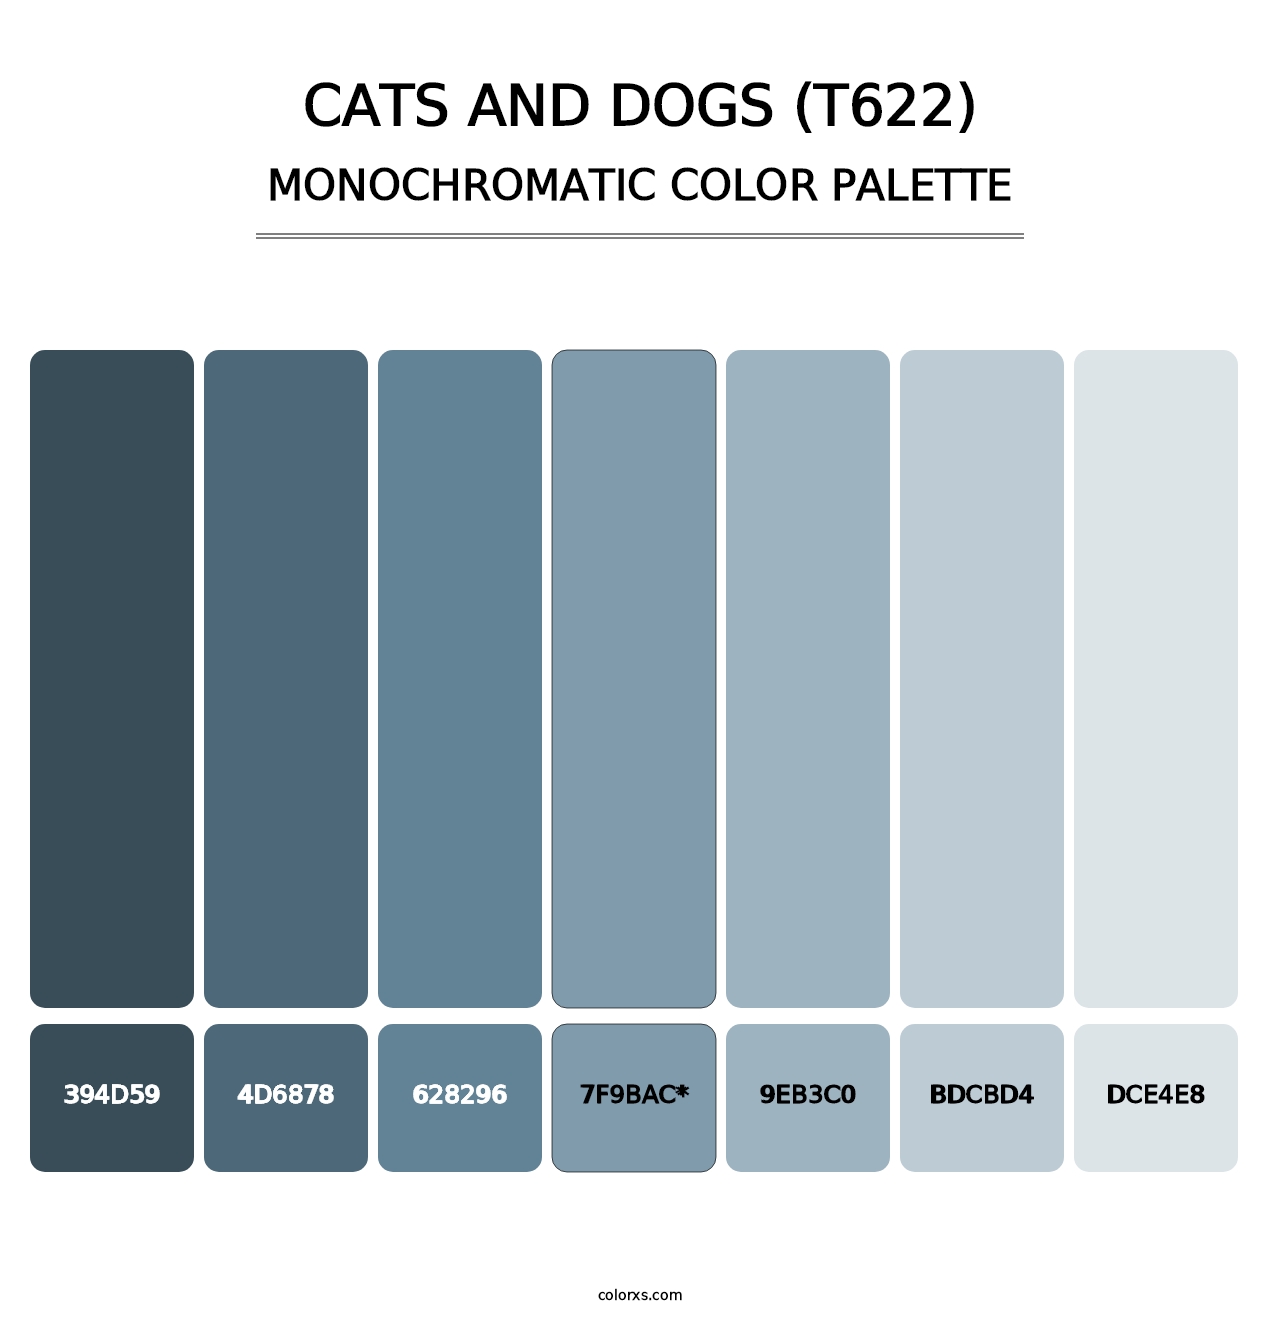 Cats and Dogs (T622) - Monochromatic Color Palette